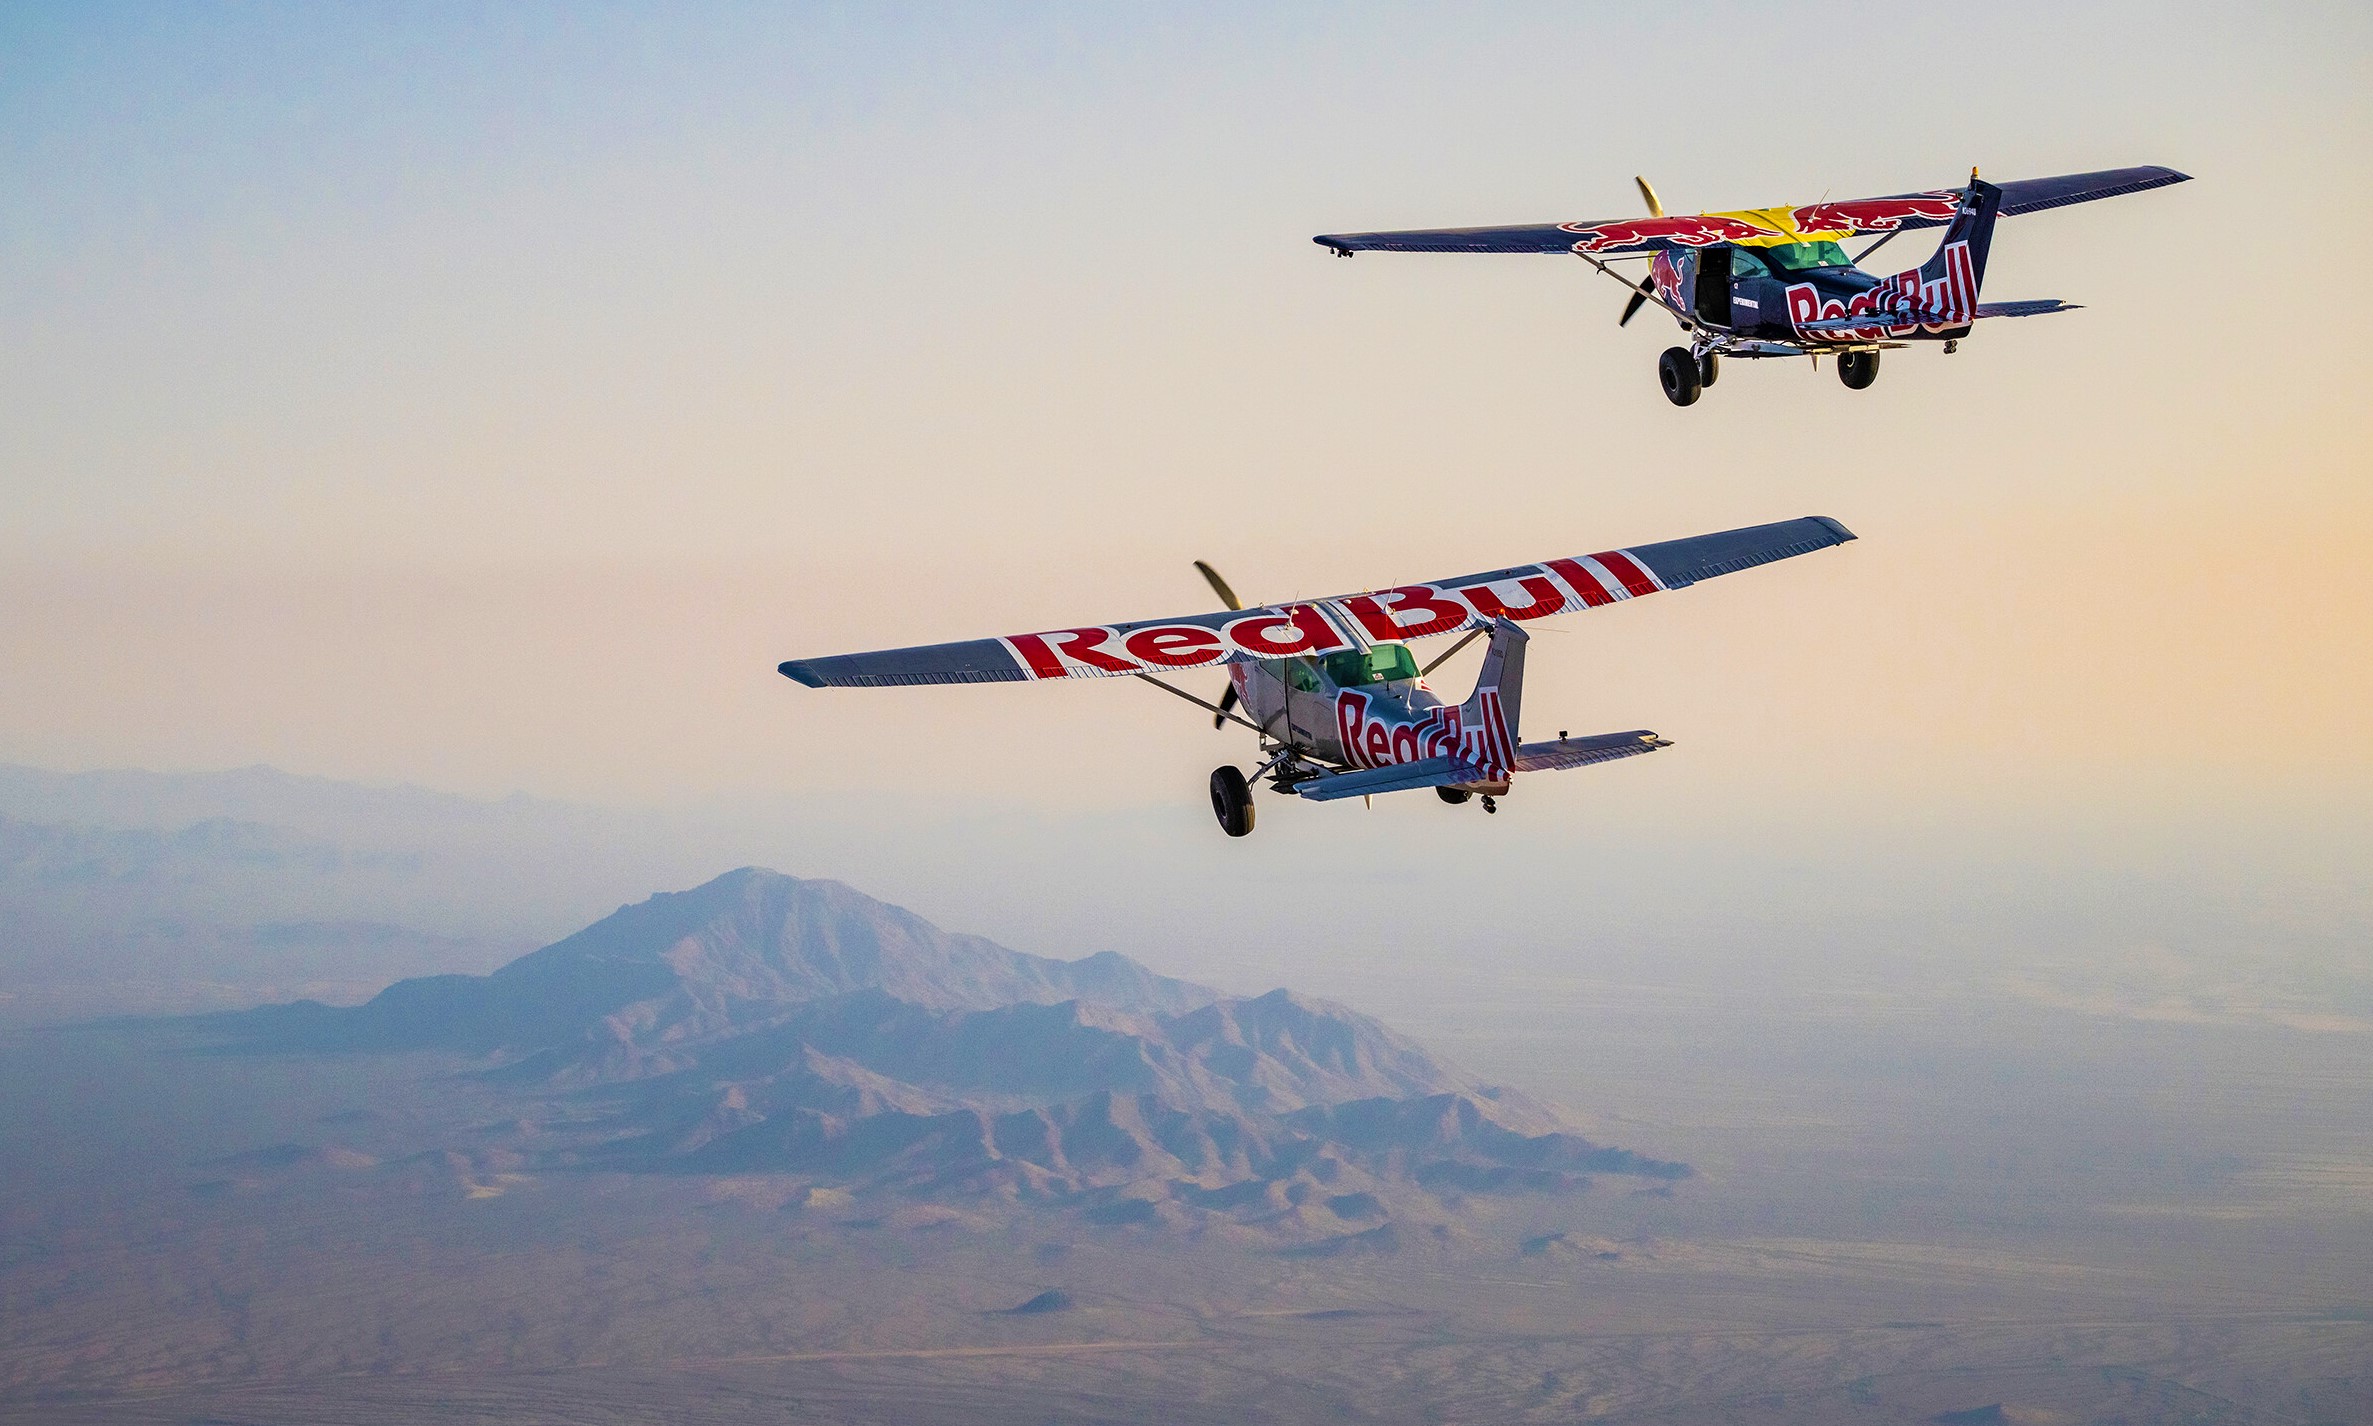 Instead of making history , Redbull daredevil pilots had their flying licenses revoked by the Federal Aviation Administration , after the aircraft crash !